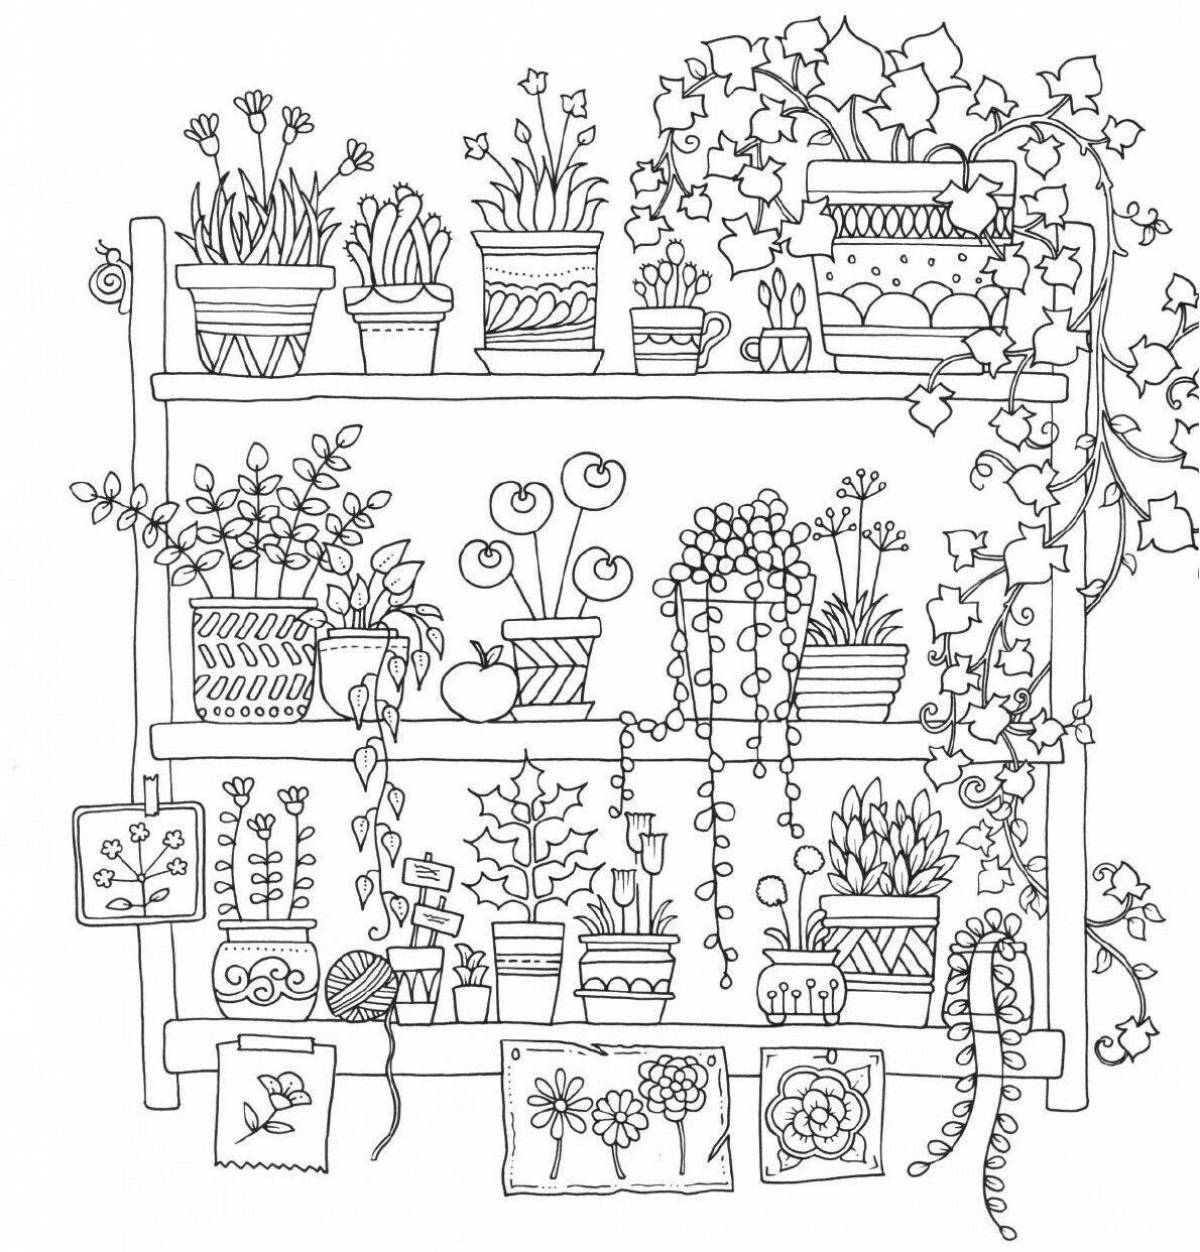 Glowing Garden of Eden coloring page